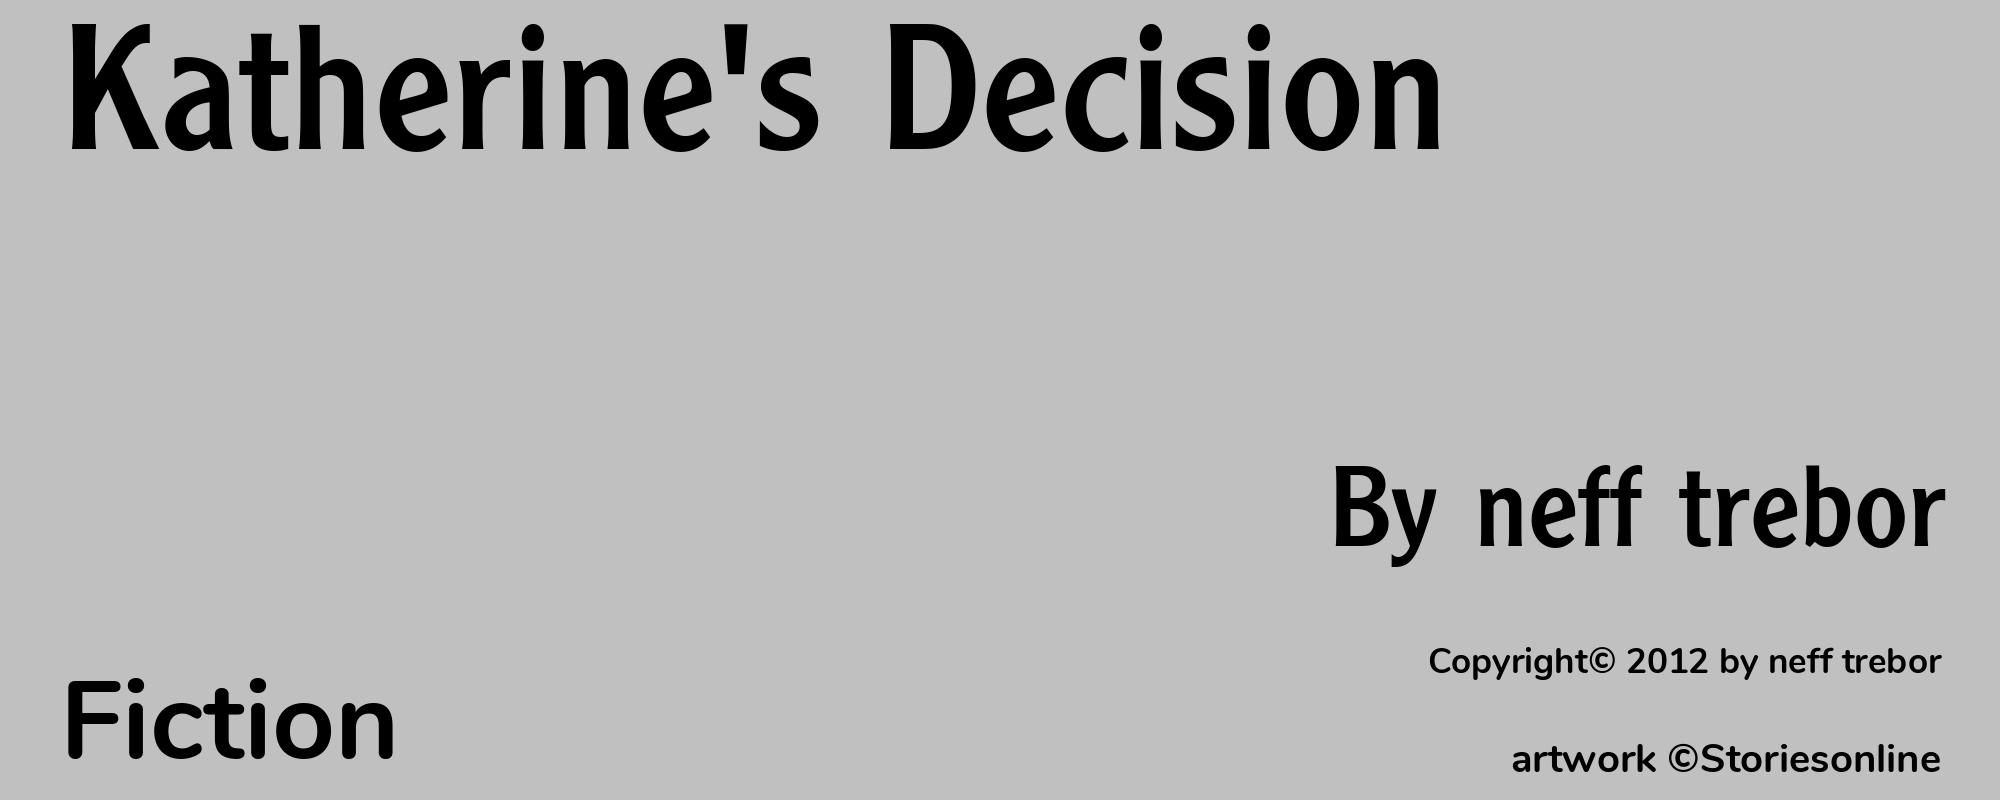 Katherine's Decision - Cover